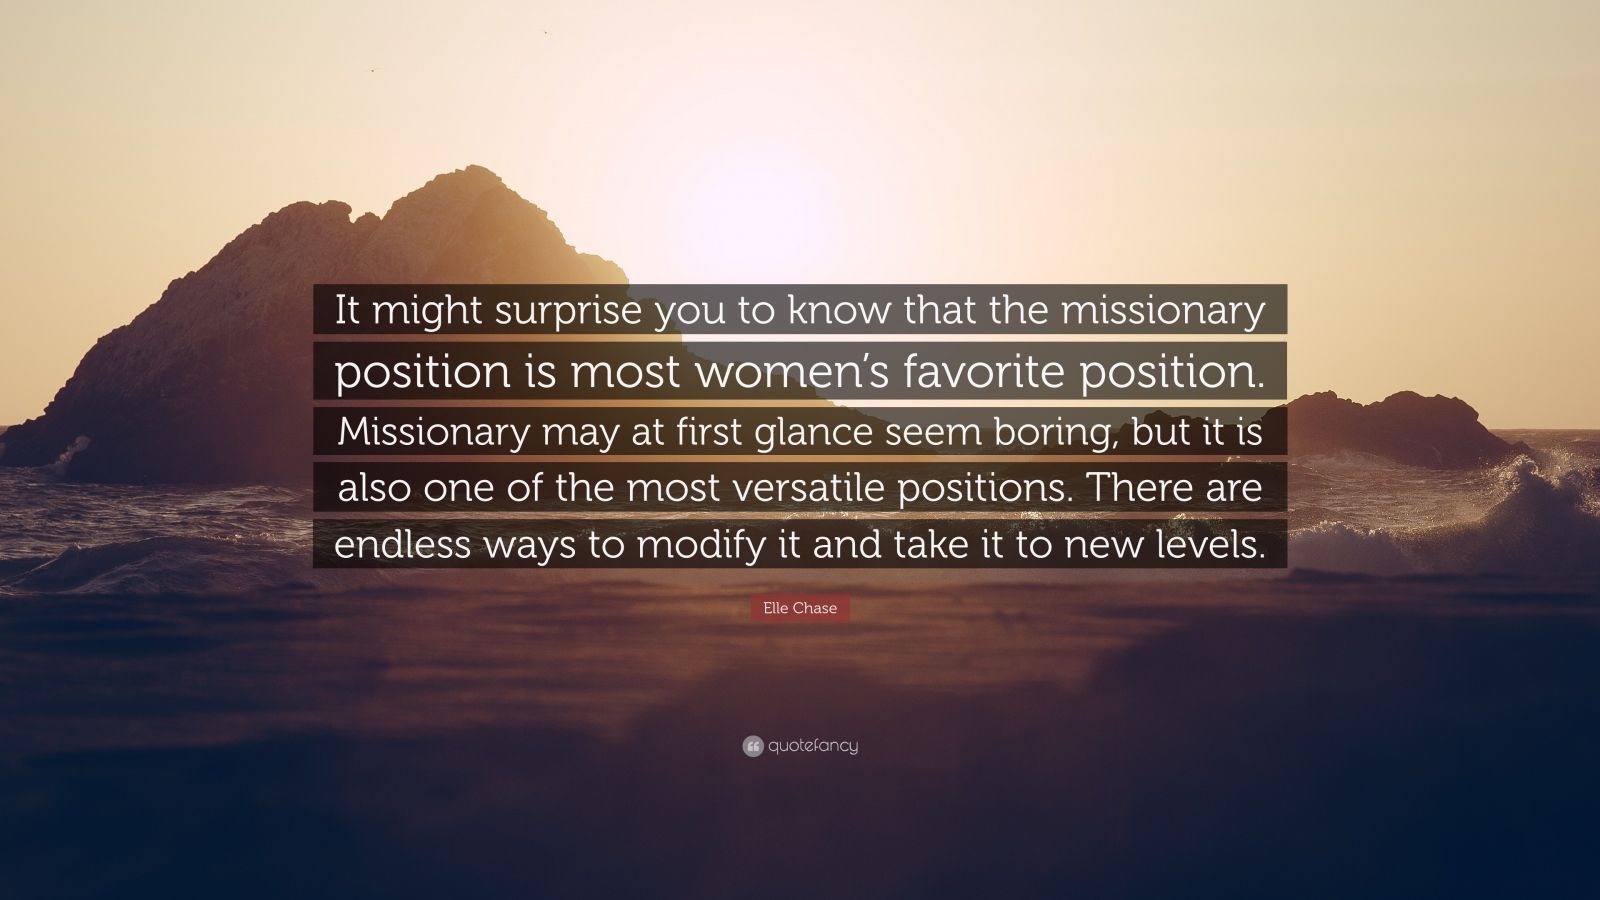 Elle Chase Quote “it Might Surprise You To Know That The Missionary Position Is Most Women’s